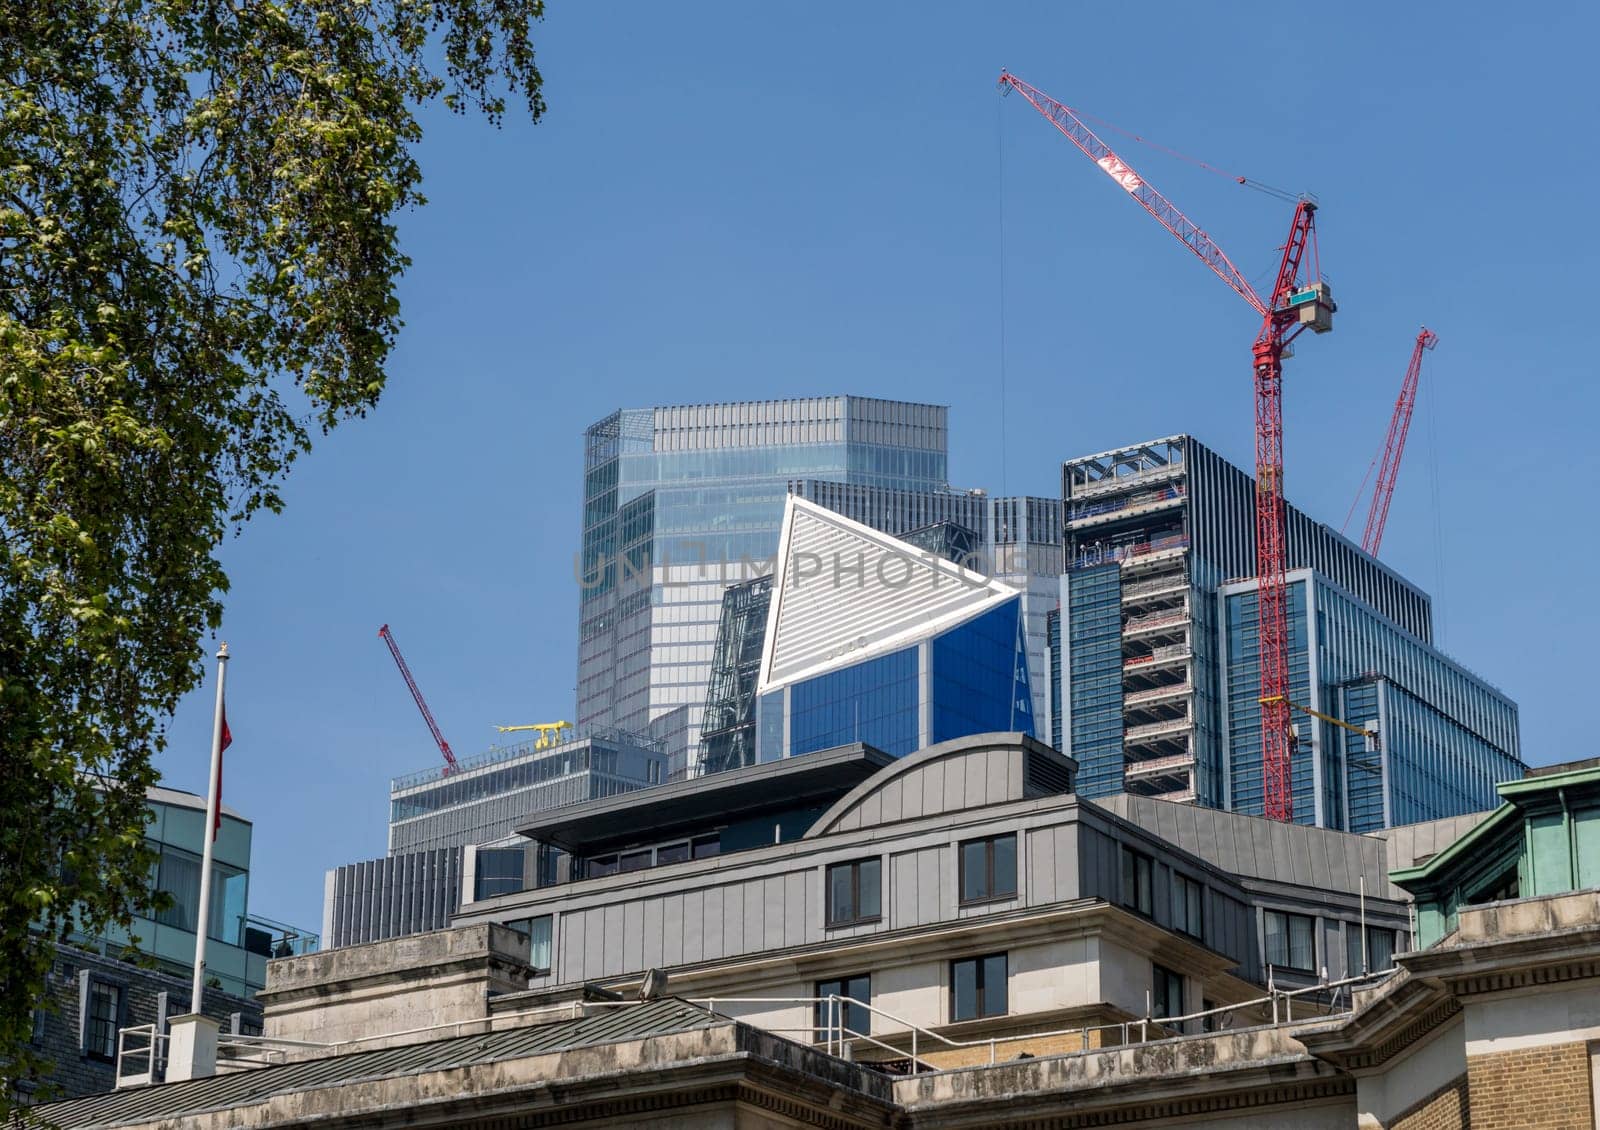 Construction of new office buildings in the City of London by steheap